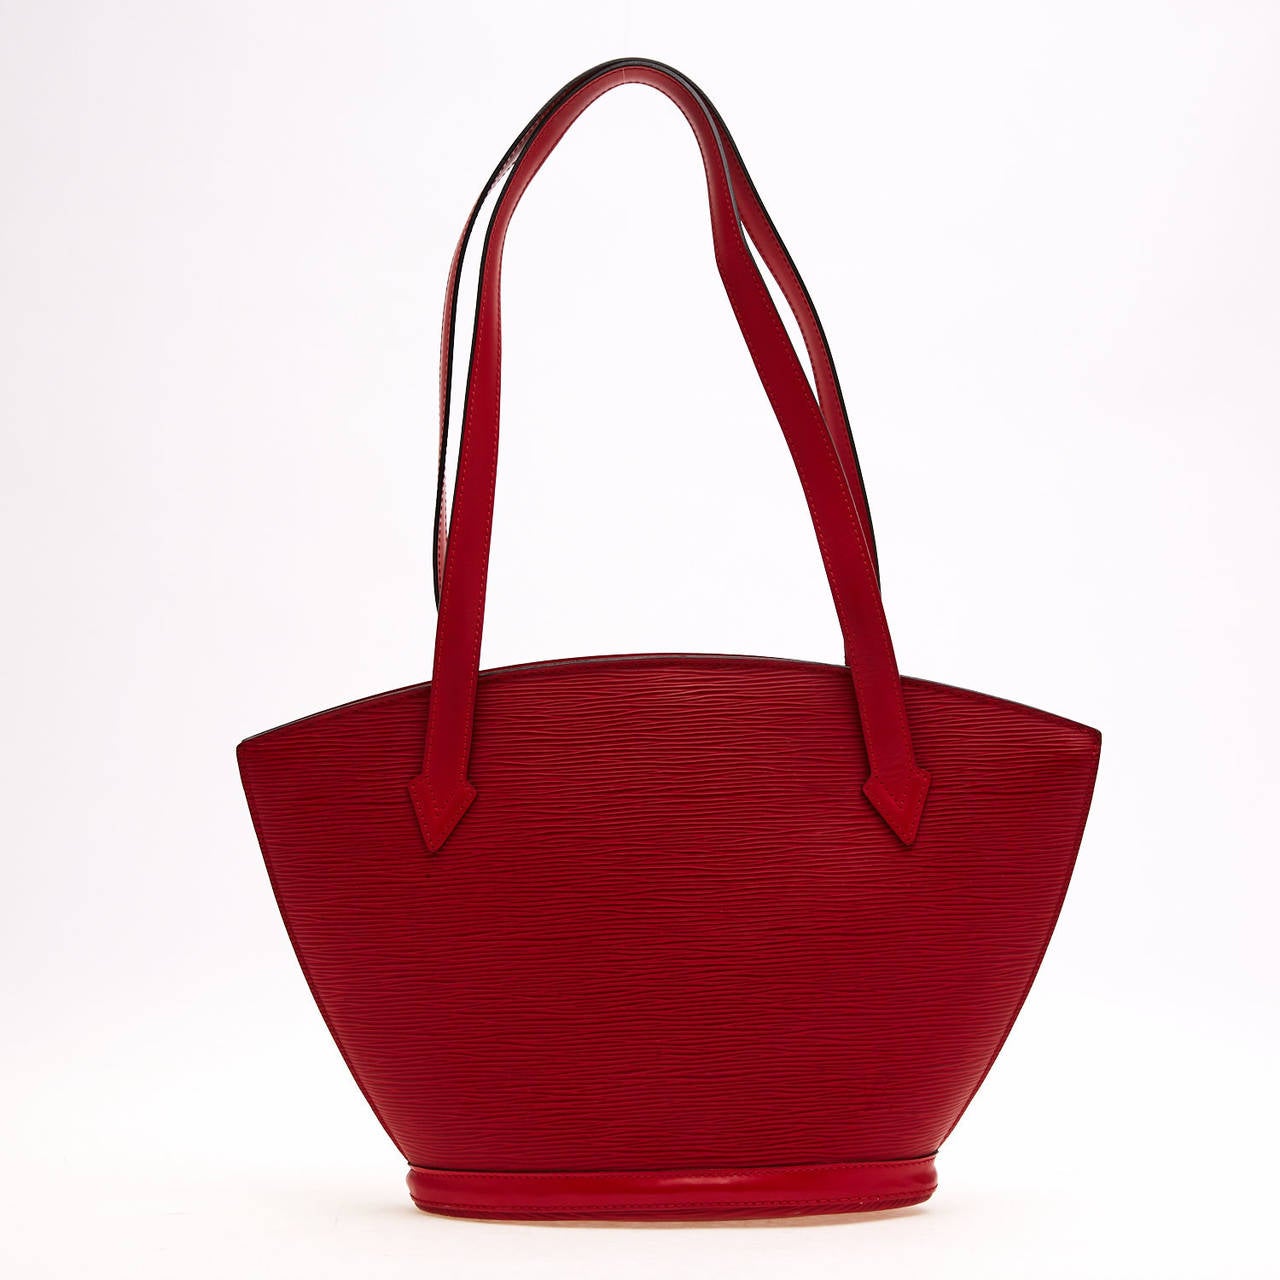 This authentic Louis Vuitton Saint Jacques Epi Leather in size PM with Long Straps in Red is refined and elegant. This tasteful purse is perfect for the day or evening. It is constructed with Louis Vuitton's signature sturdy Epi leather and an